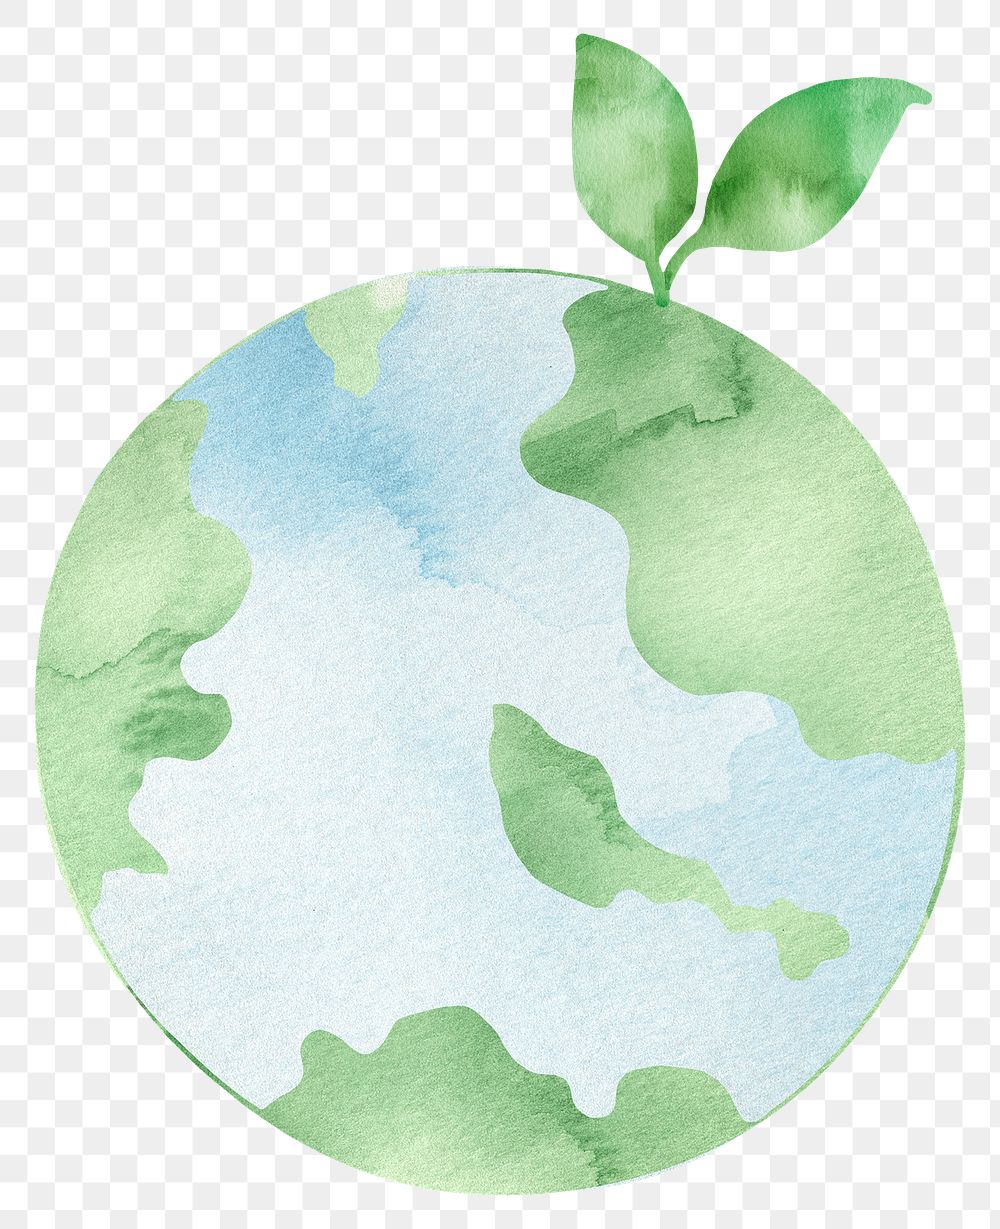 Earth png natural environment in watercolor design element